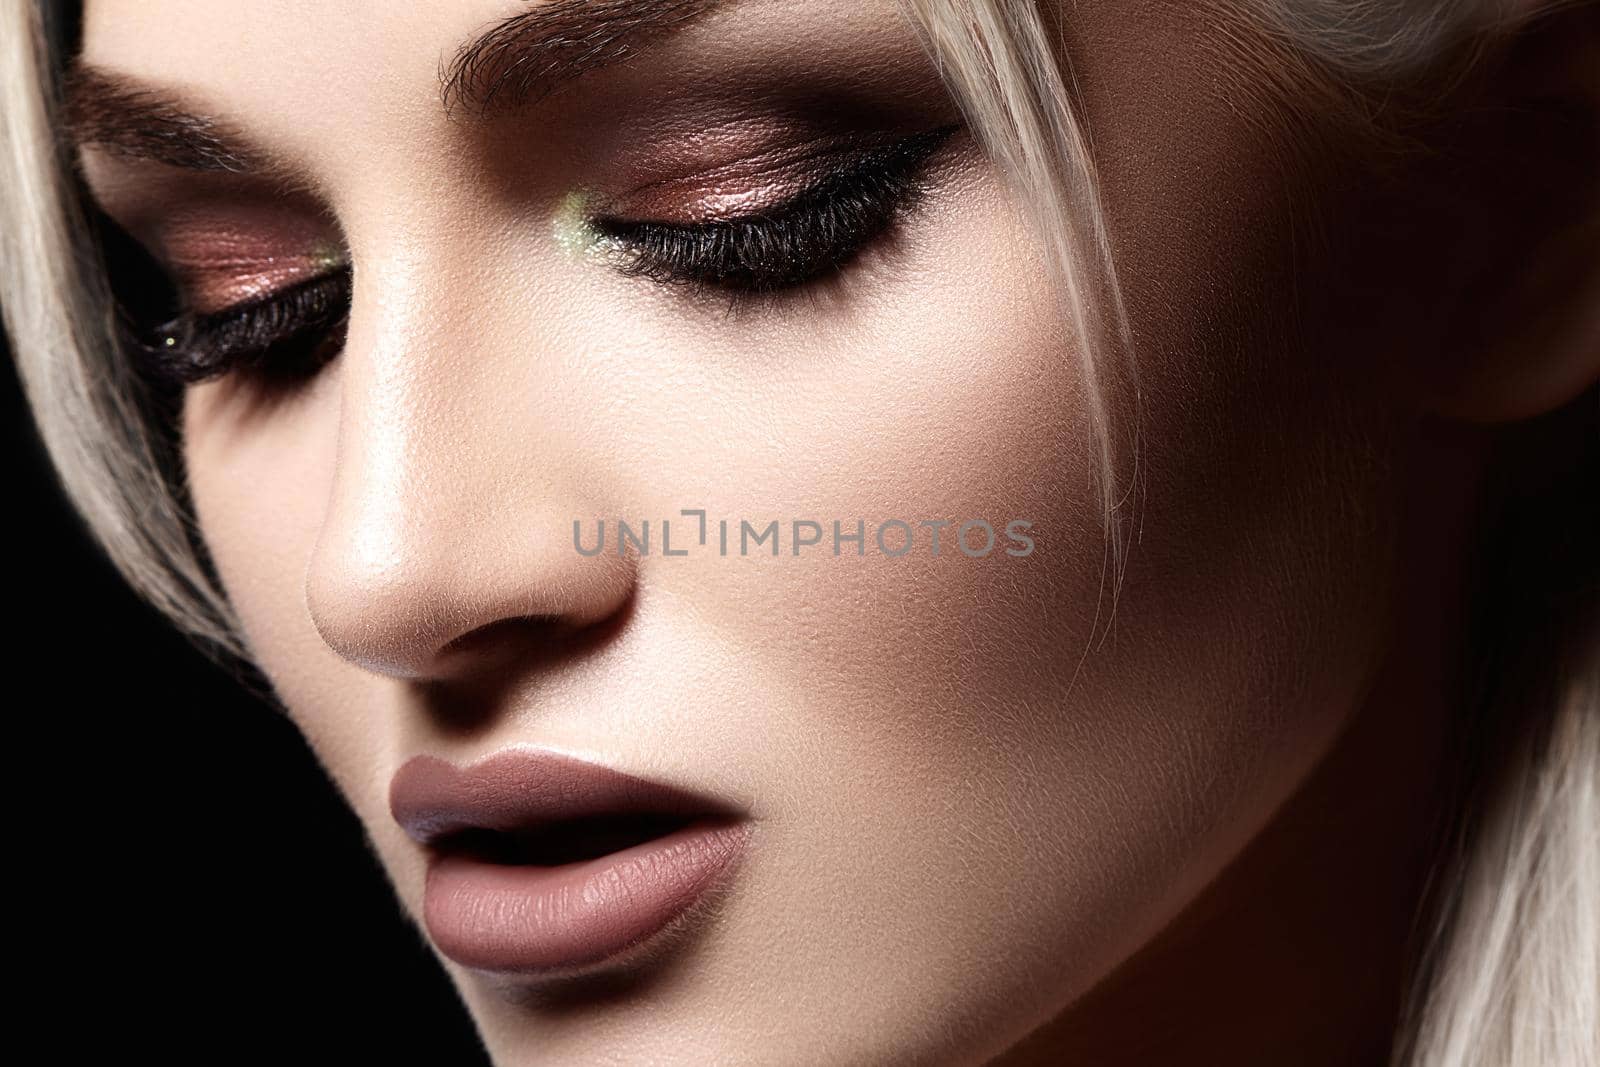 Closeup portrait with of beautiful woman face. Fashion makeup, clean shiny skin. Makeup and cosmetic. Beauty style on model face. Blond hair style